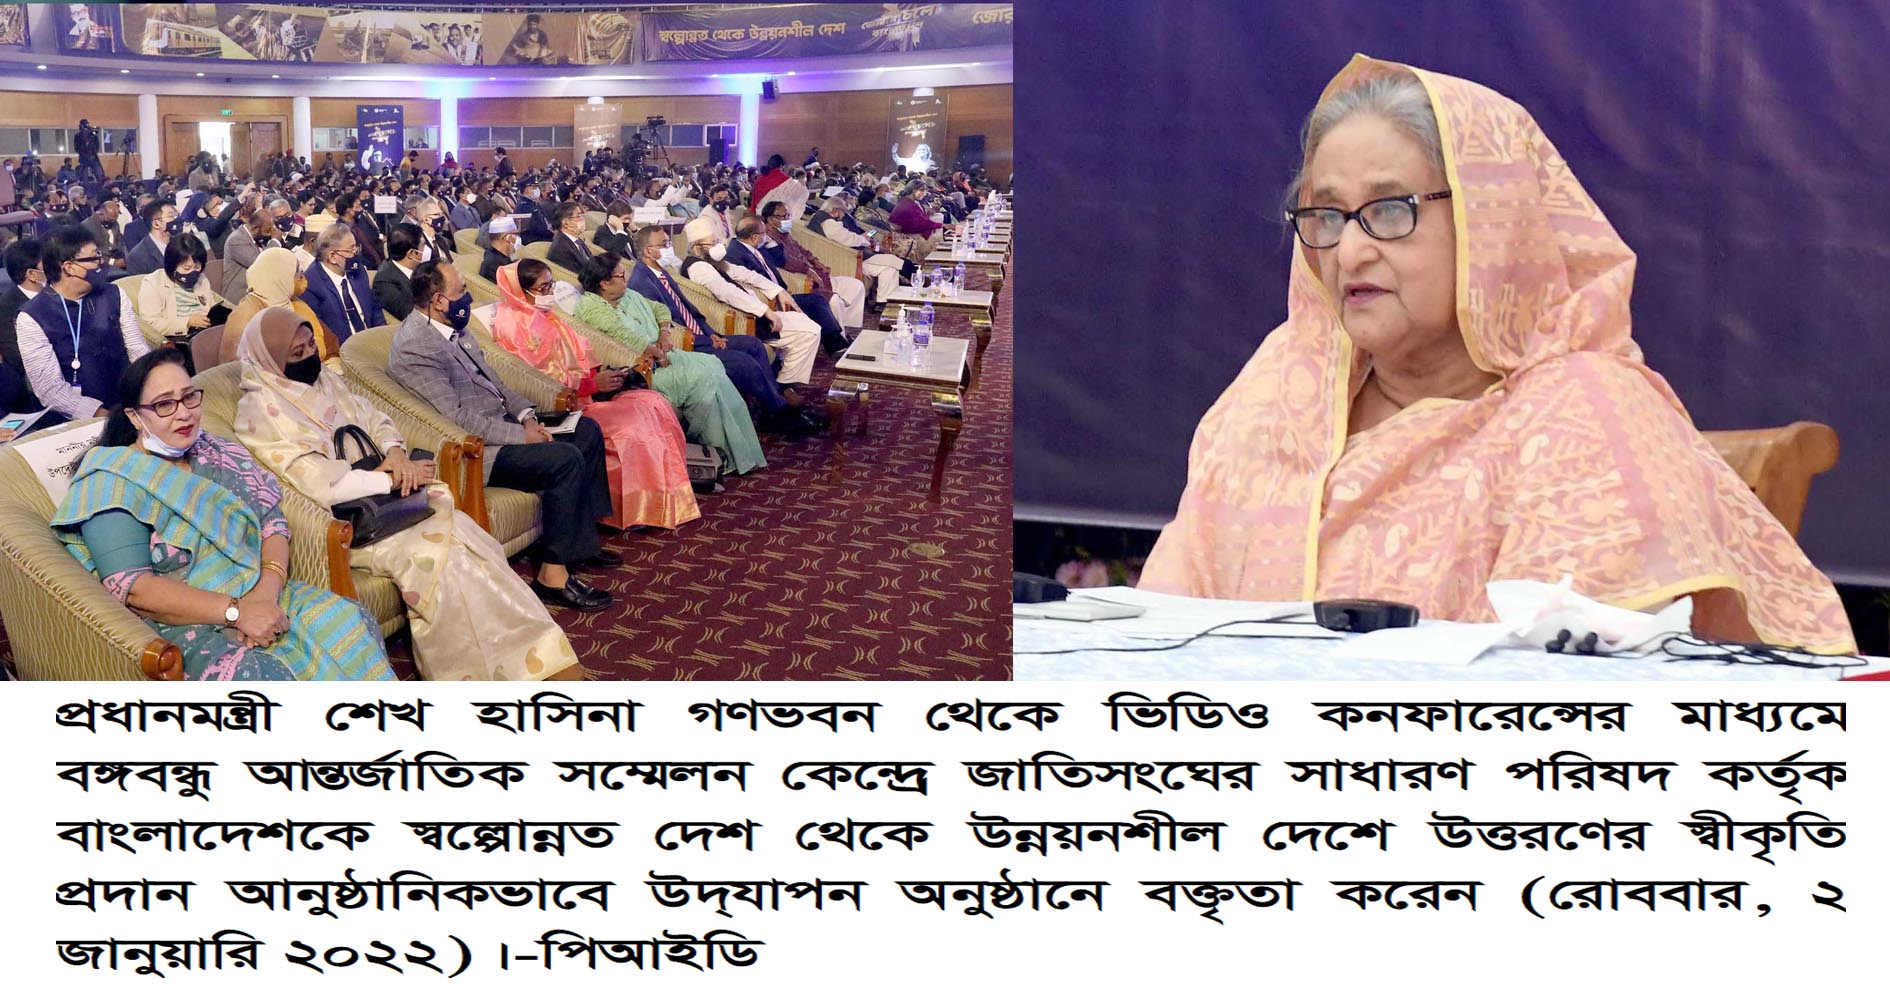 Sheikh Hasina joins event via video conference